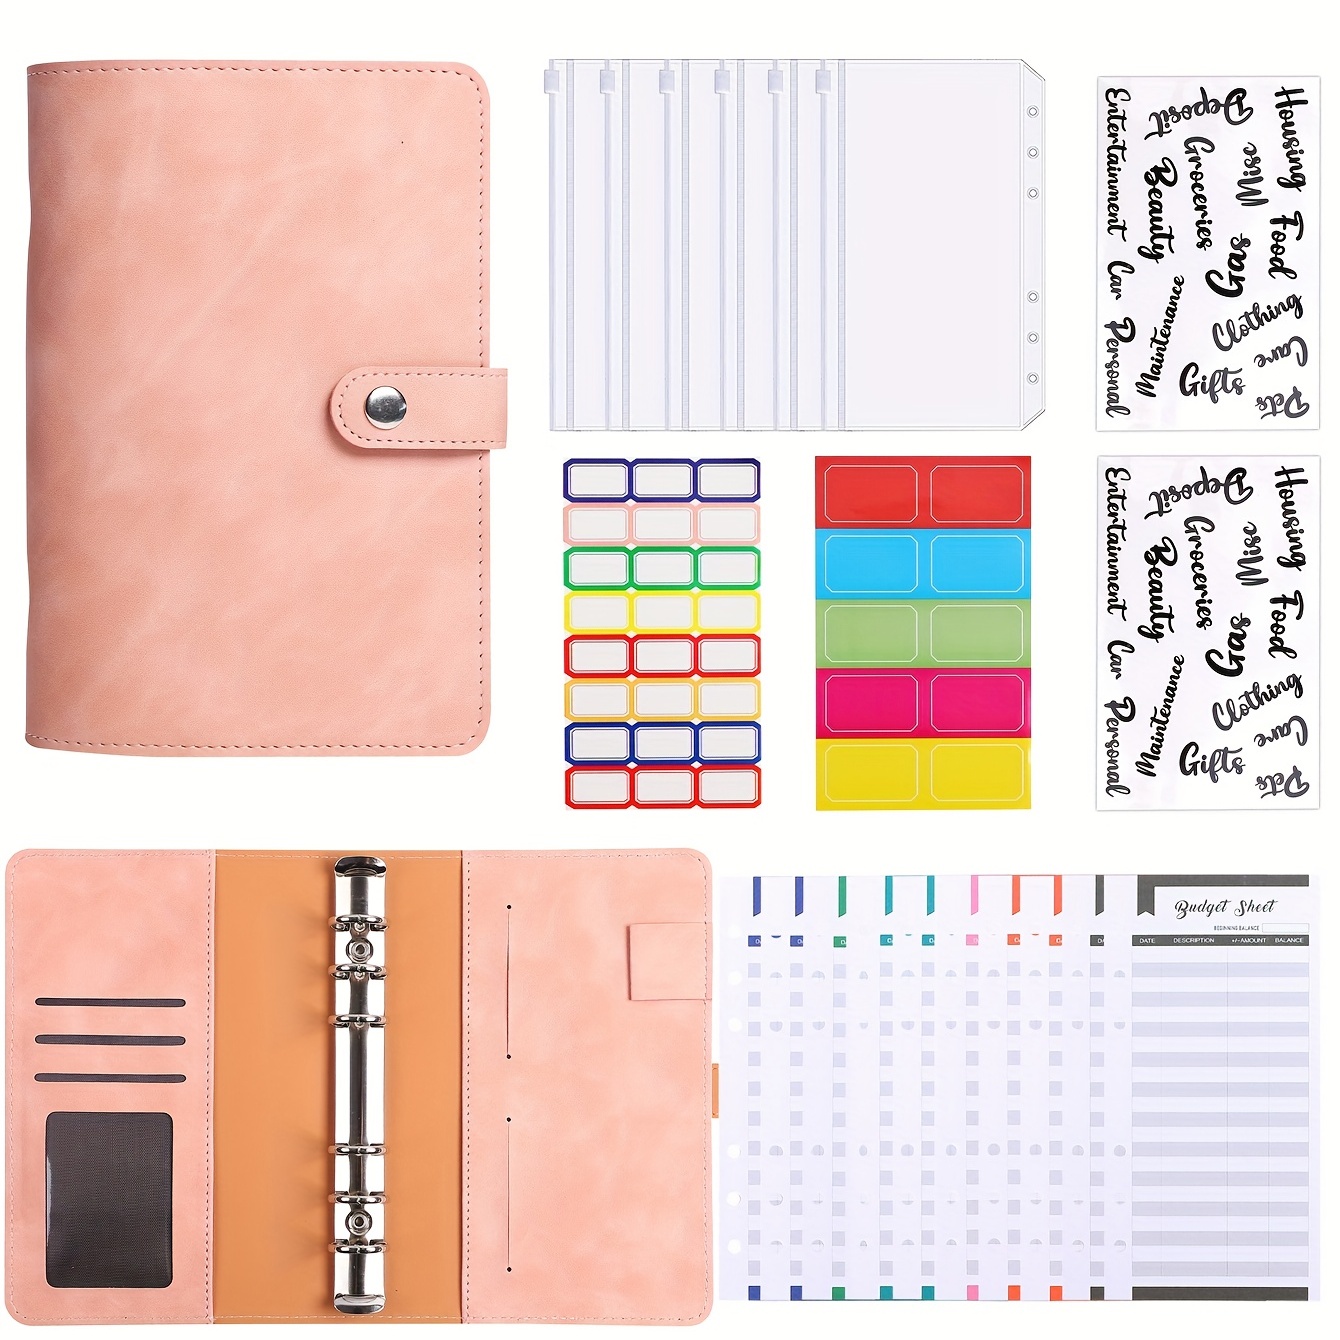 

Organize Your Finances In Style With This Soft Faux Leather Binder Set - Includes 6 Zipper Bags, 12 Budget Cards, And 8 Stickers!